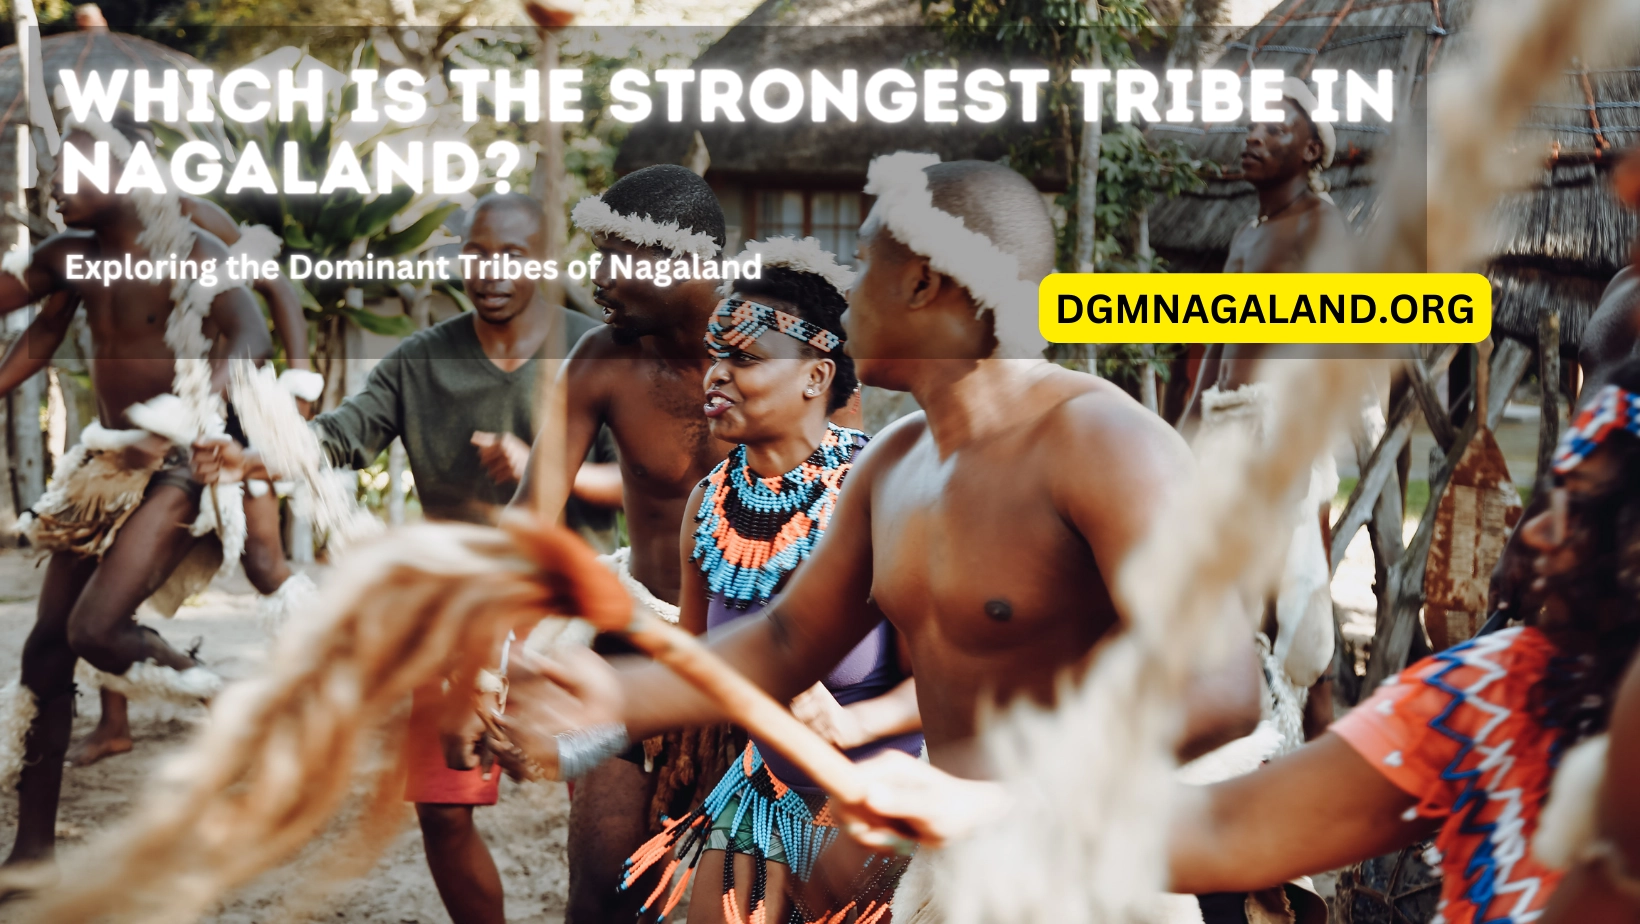 Which is the strongest tribe in Nagaland?